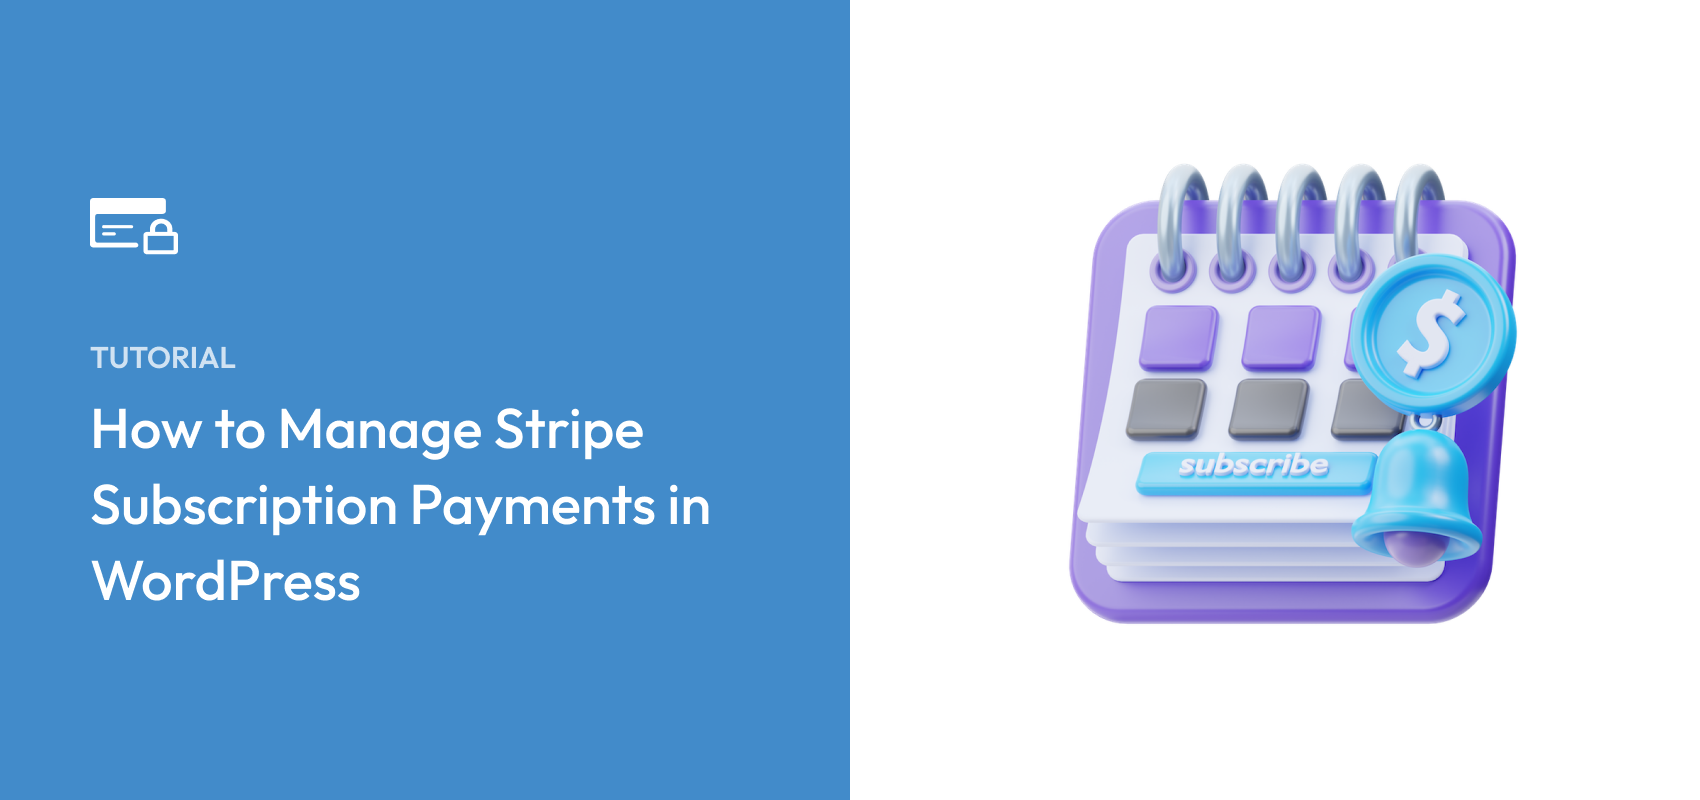 How to Manage Stripe Subscription Payments in WordPress